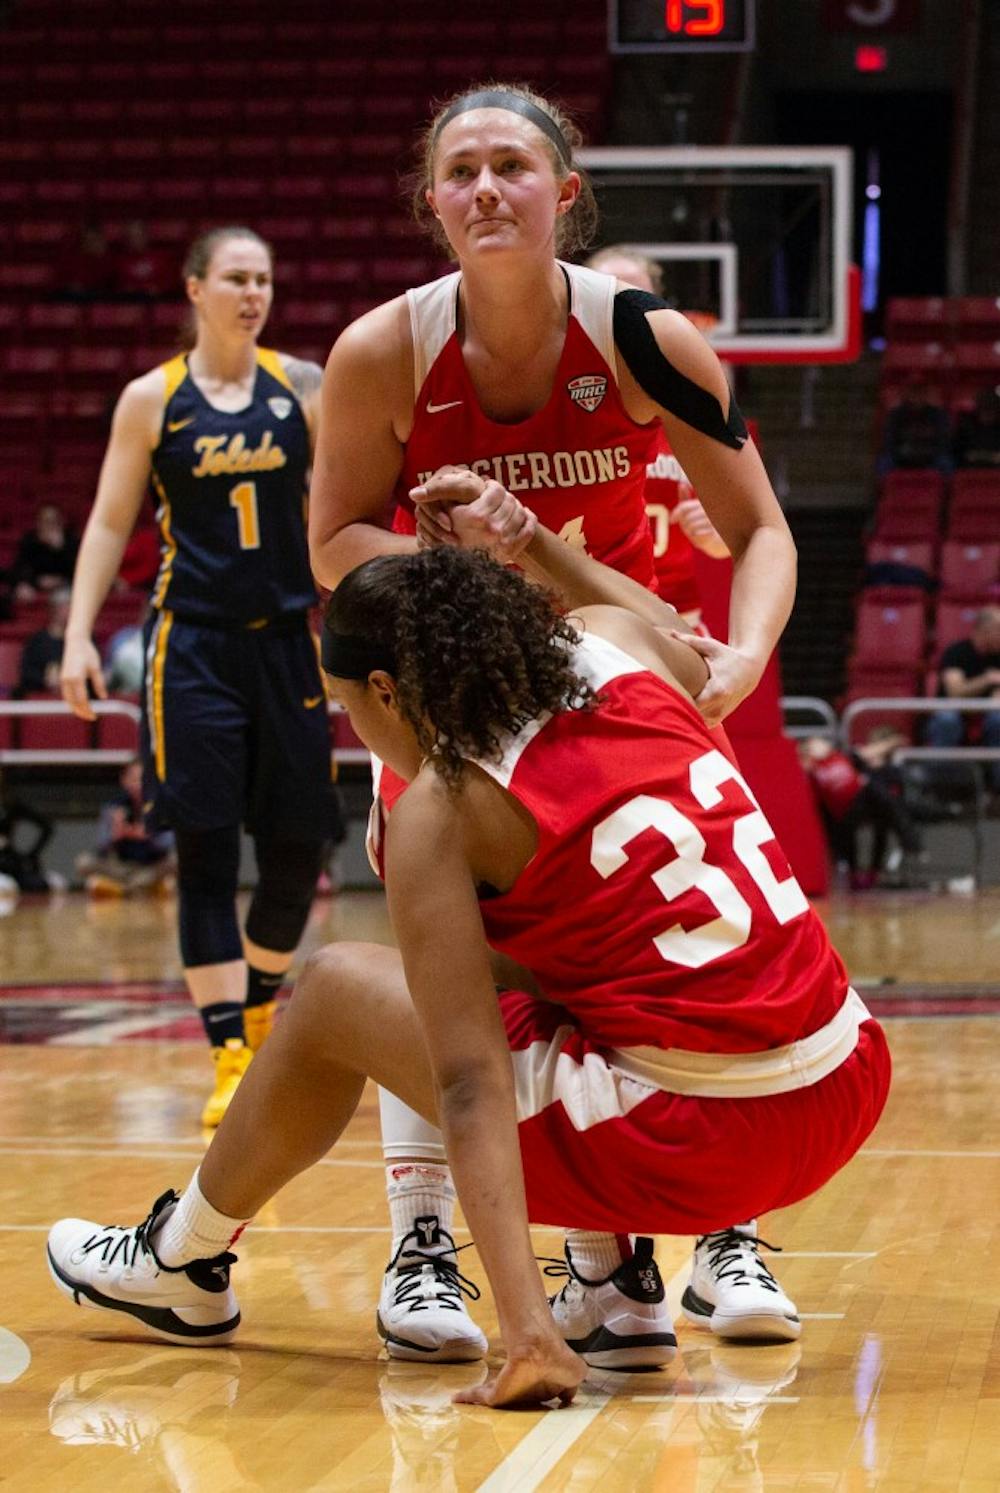 4 takeaways from Ball State Women’s Basketball second loss to Central Michigan